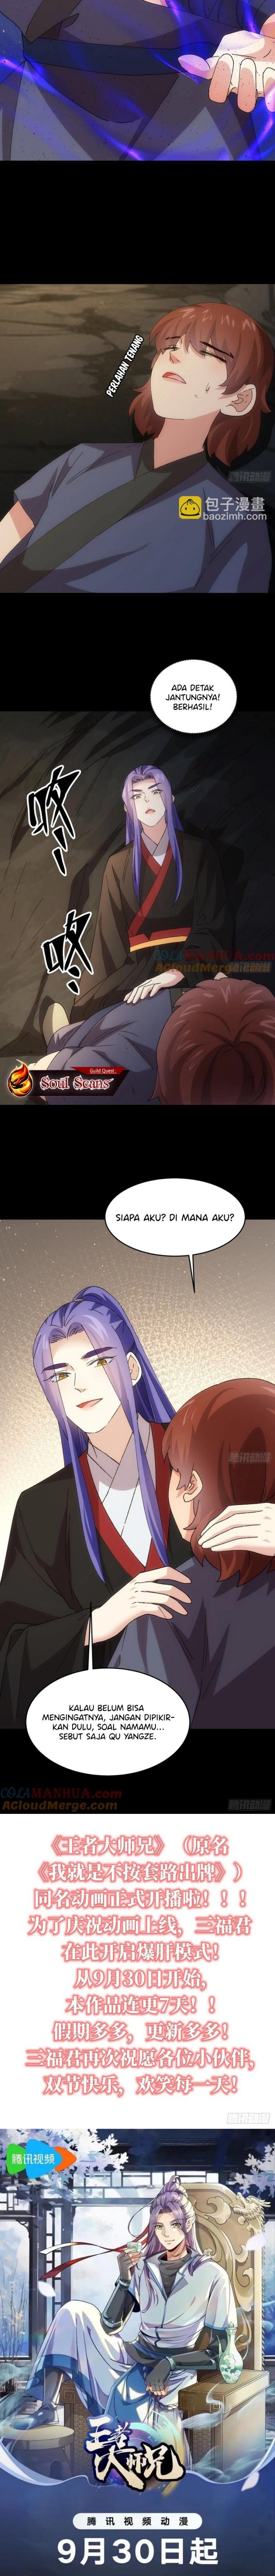 Dilarang COPAS - situs resmi www.mangacanblog.com - Komik i just dont play the card according to the routine 207 - chapter 207 208 Indonesia i just dont play the card according to the routine 207 - chapter 207 Terbaru 6|Baca Manga Komik Indonesia|Mangacan